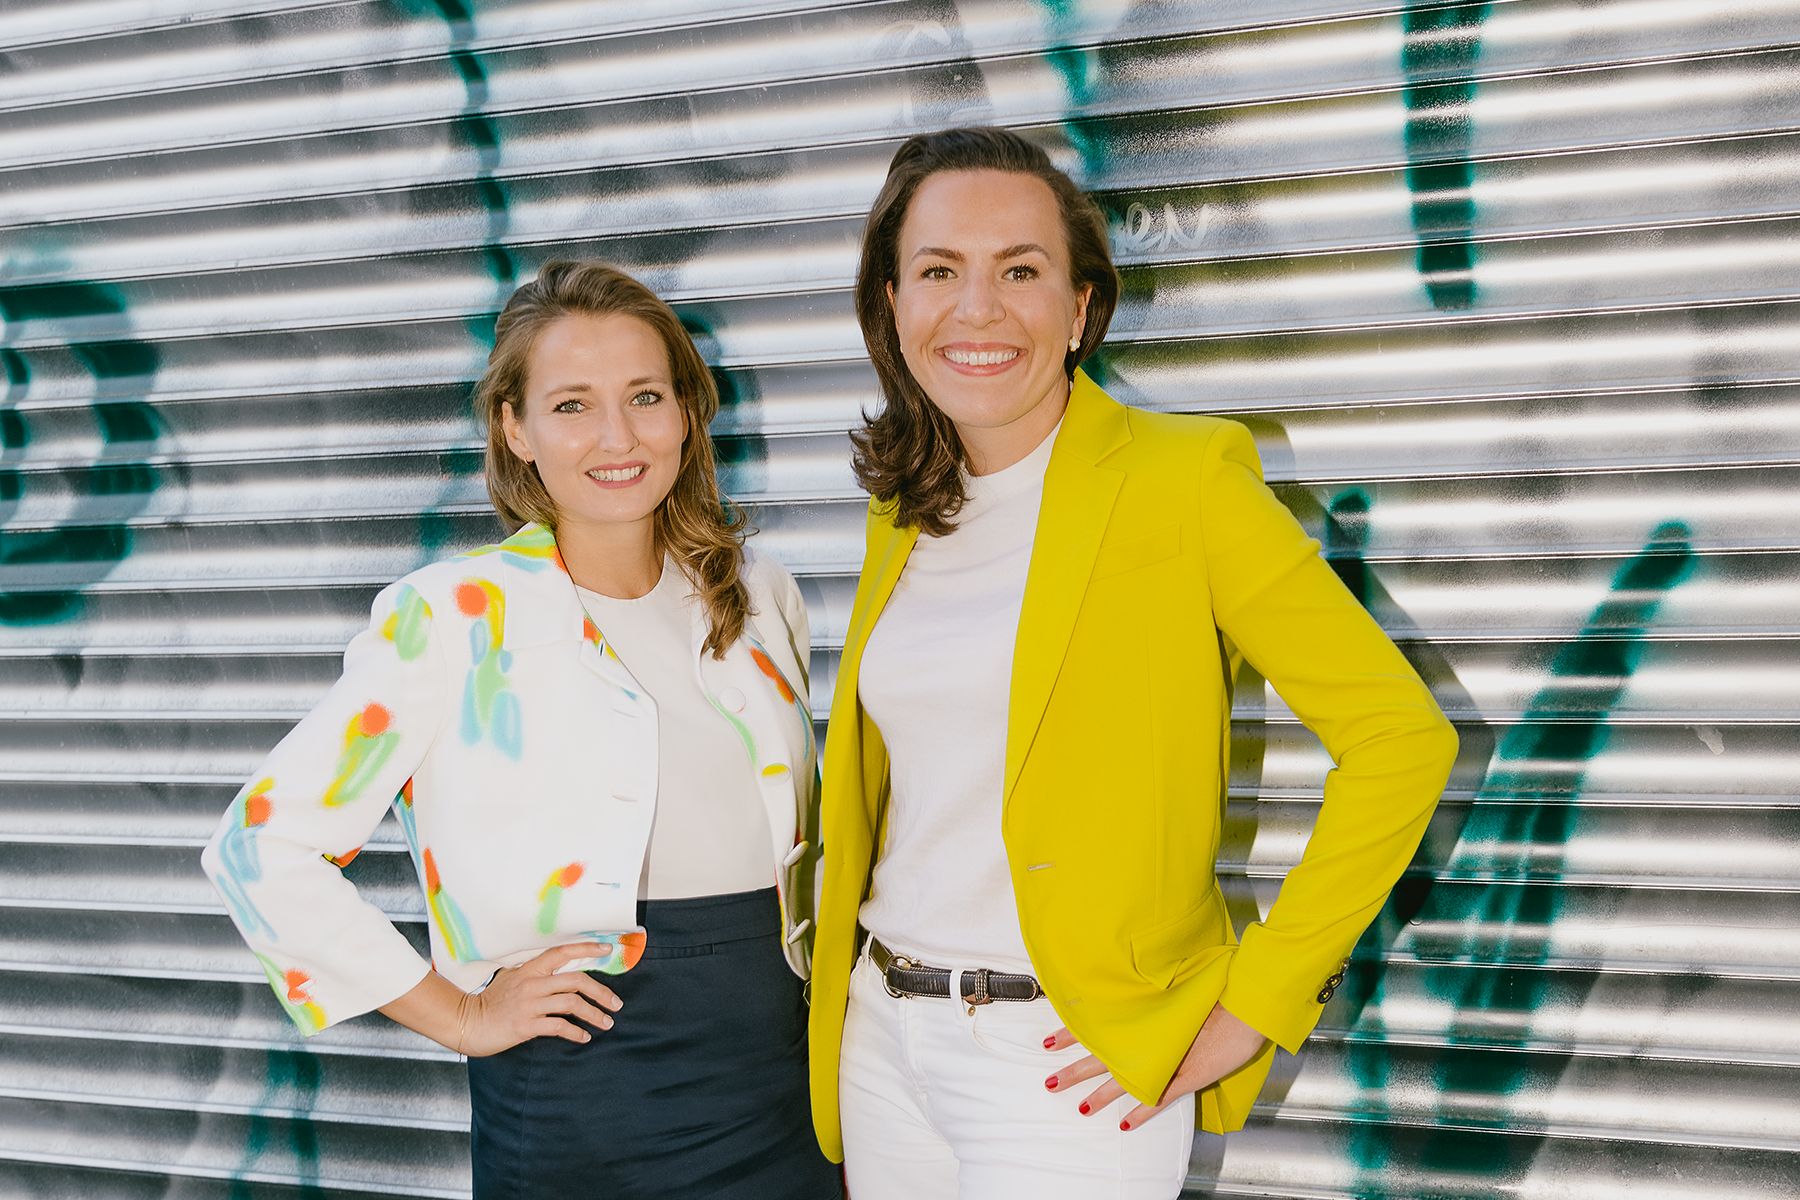 Backed by Index at Seed. Estelle Merle & Charlotte Pallua, co-founders of topi.